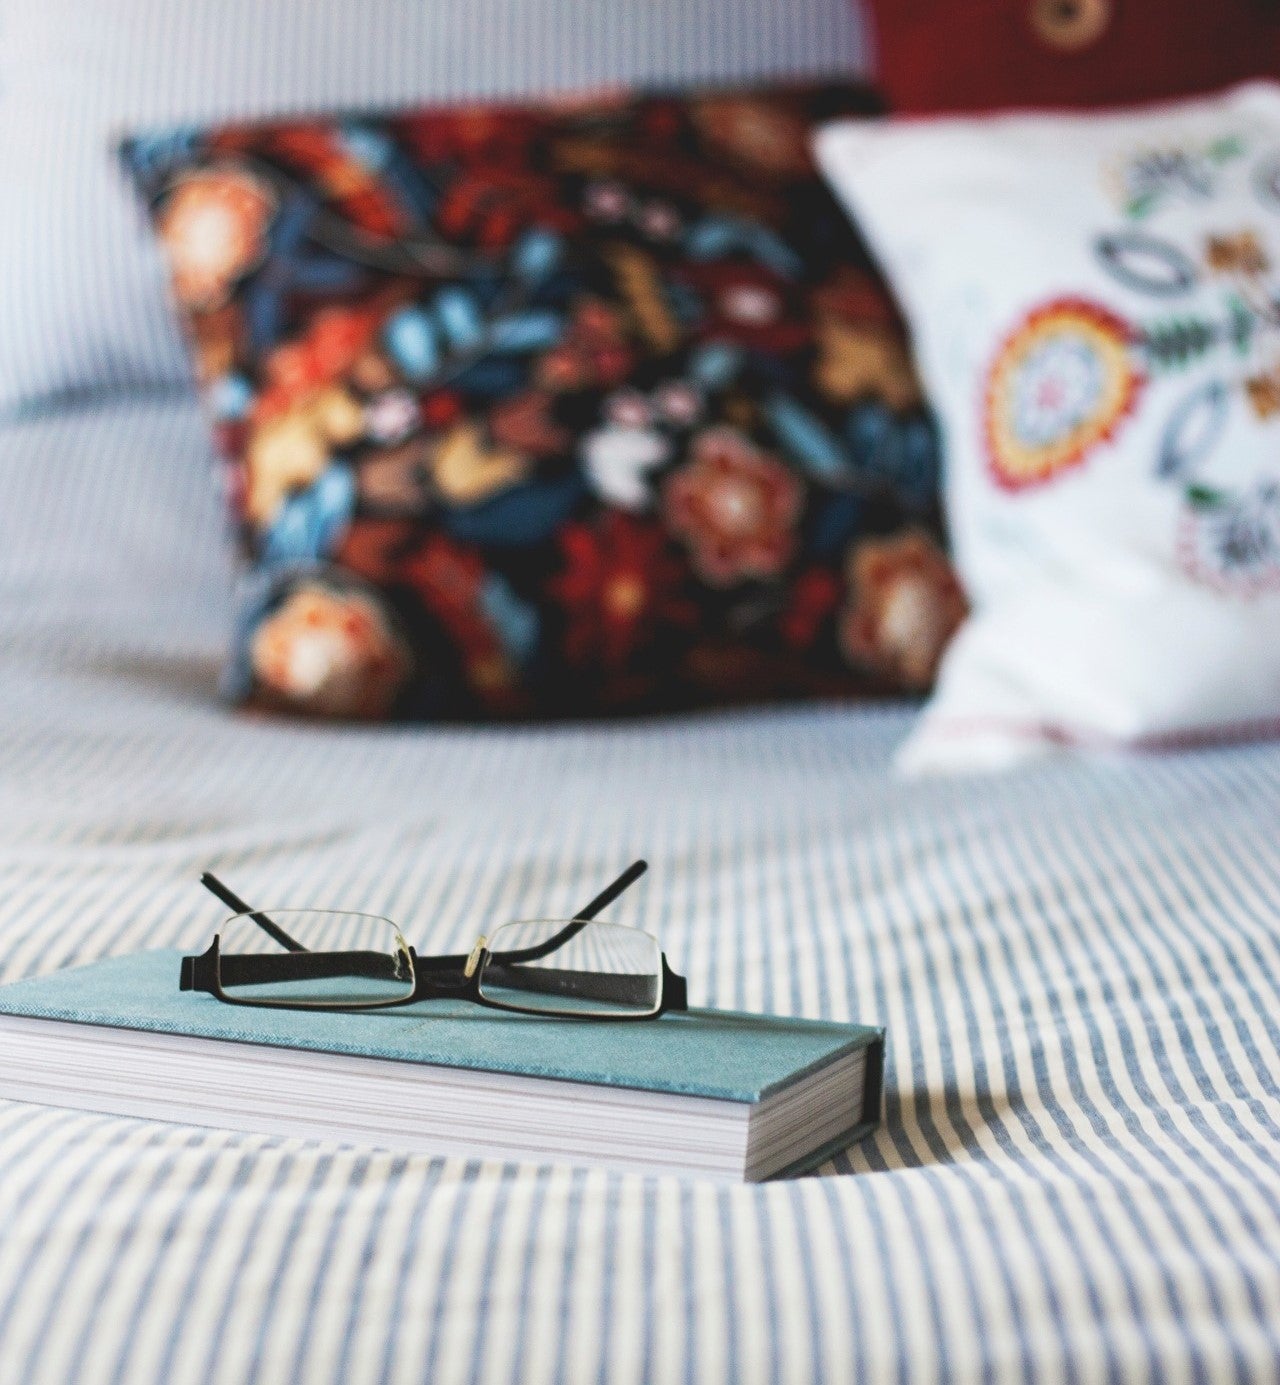 Book and pair of glasses on a bed